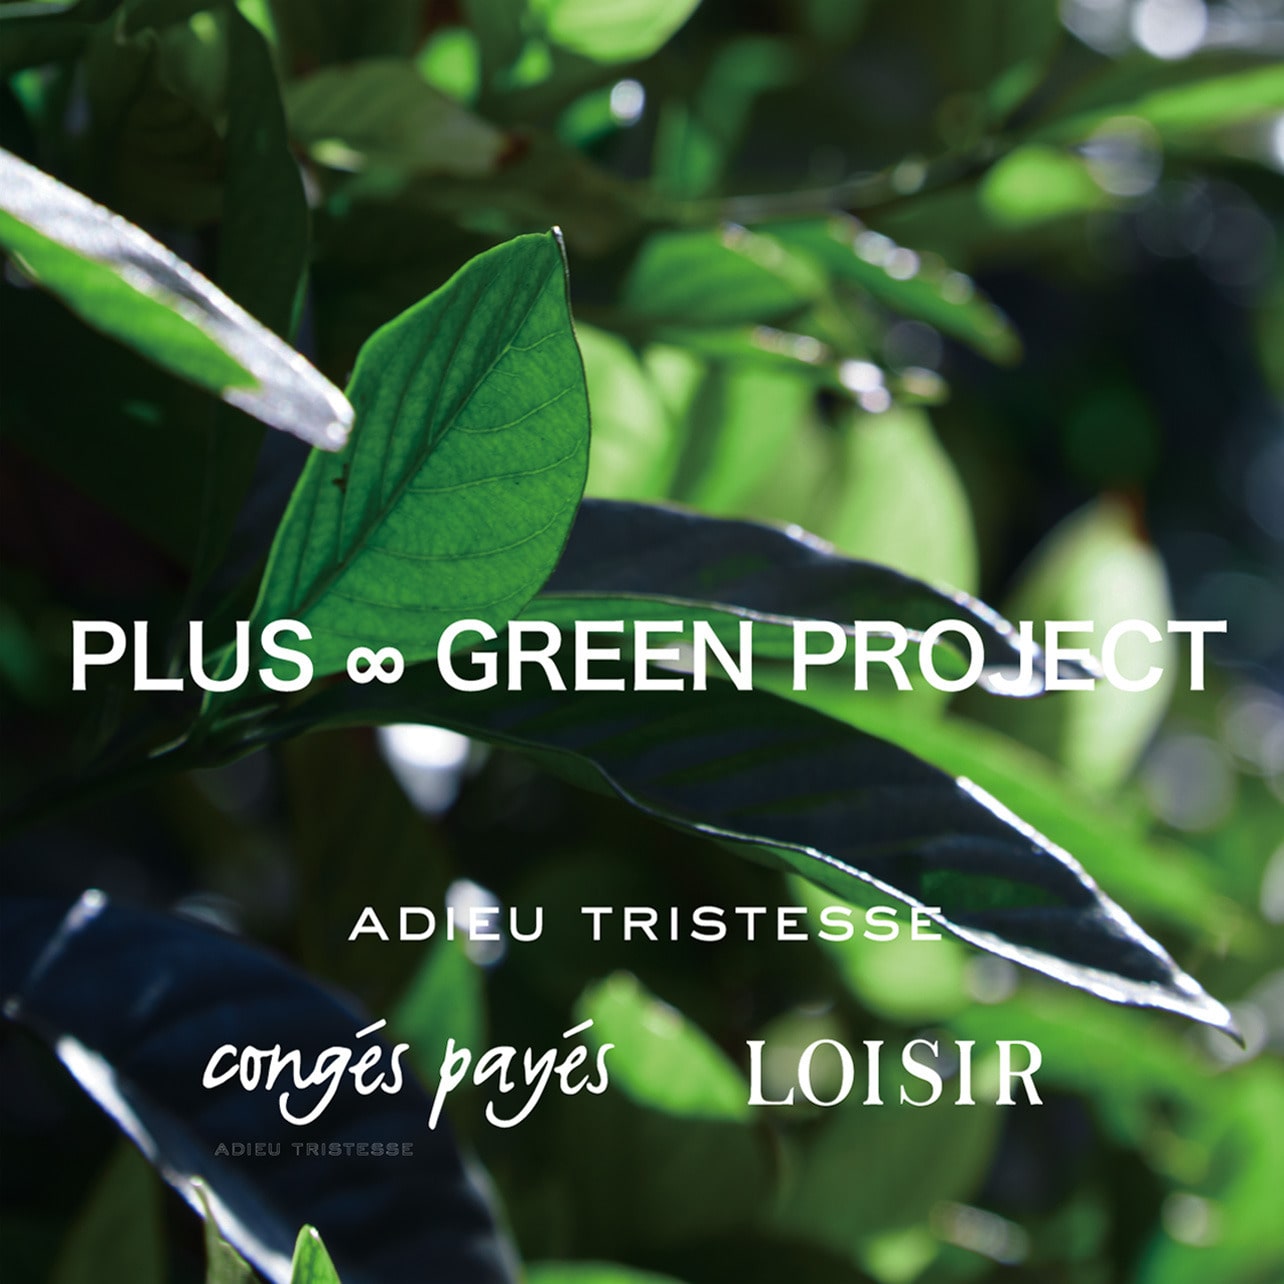 PLUS ∞ GREEN PROJECT